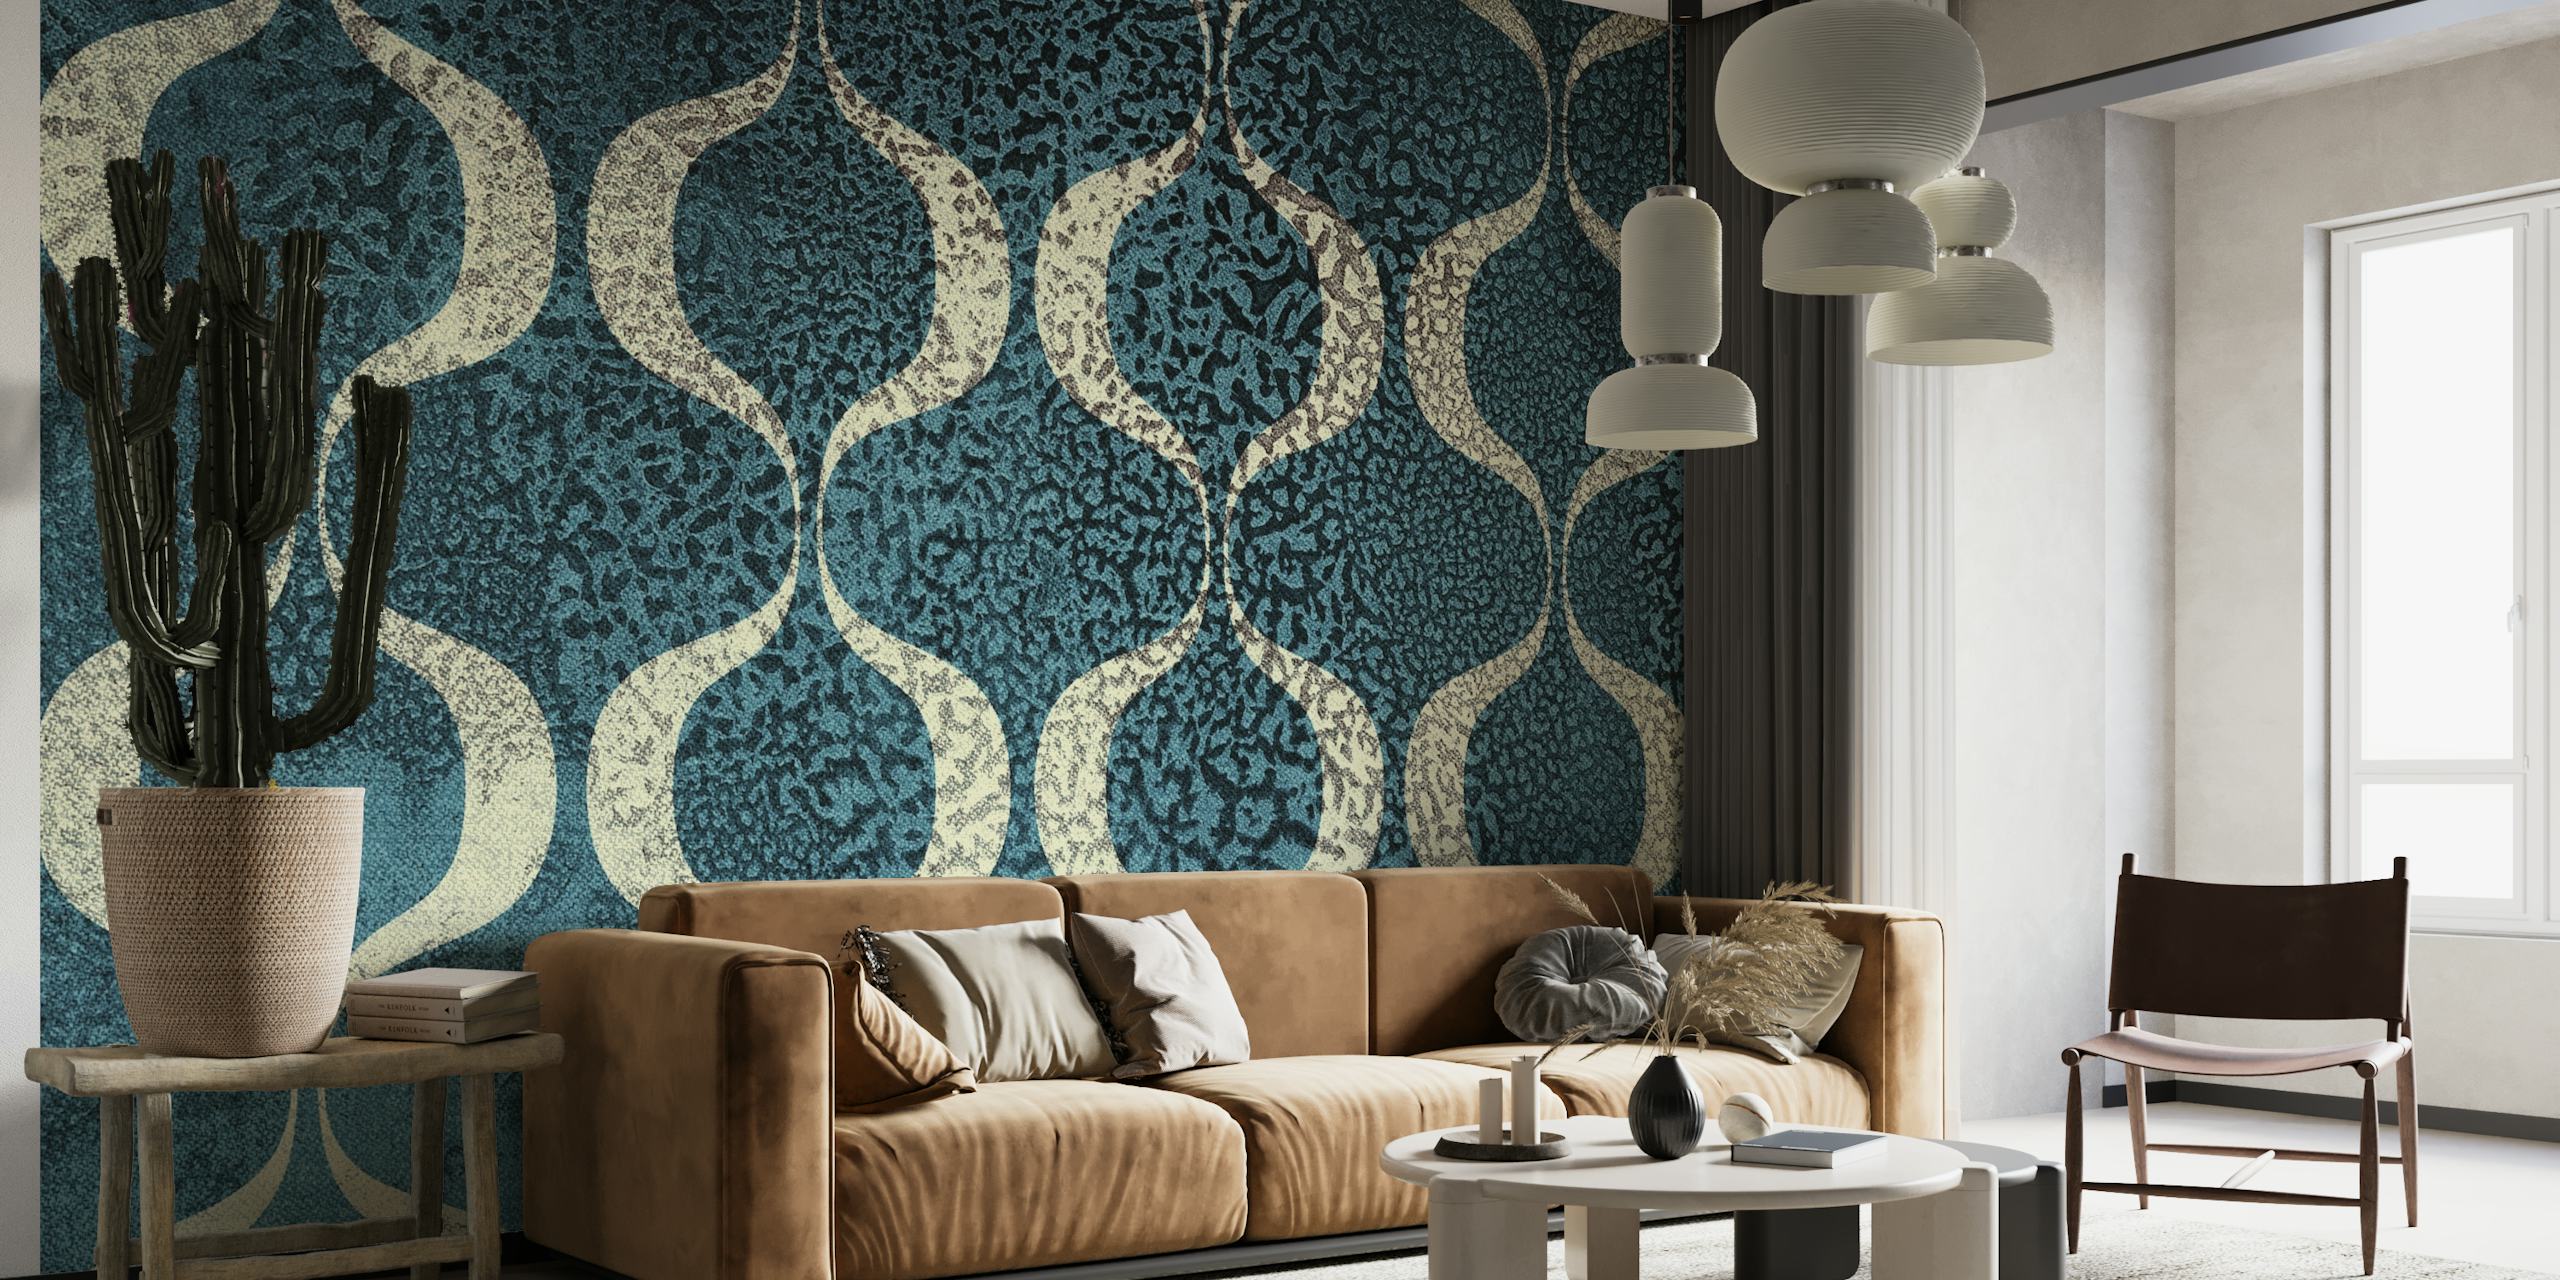 Crazy Mid Century Grunge wall mural with blue semi-circular patterns and textures